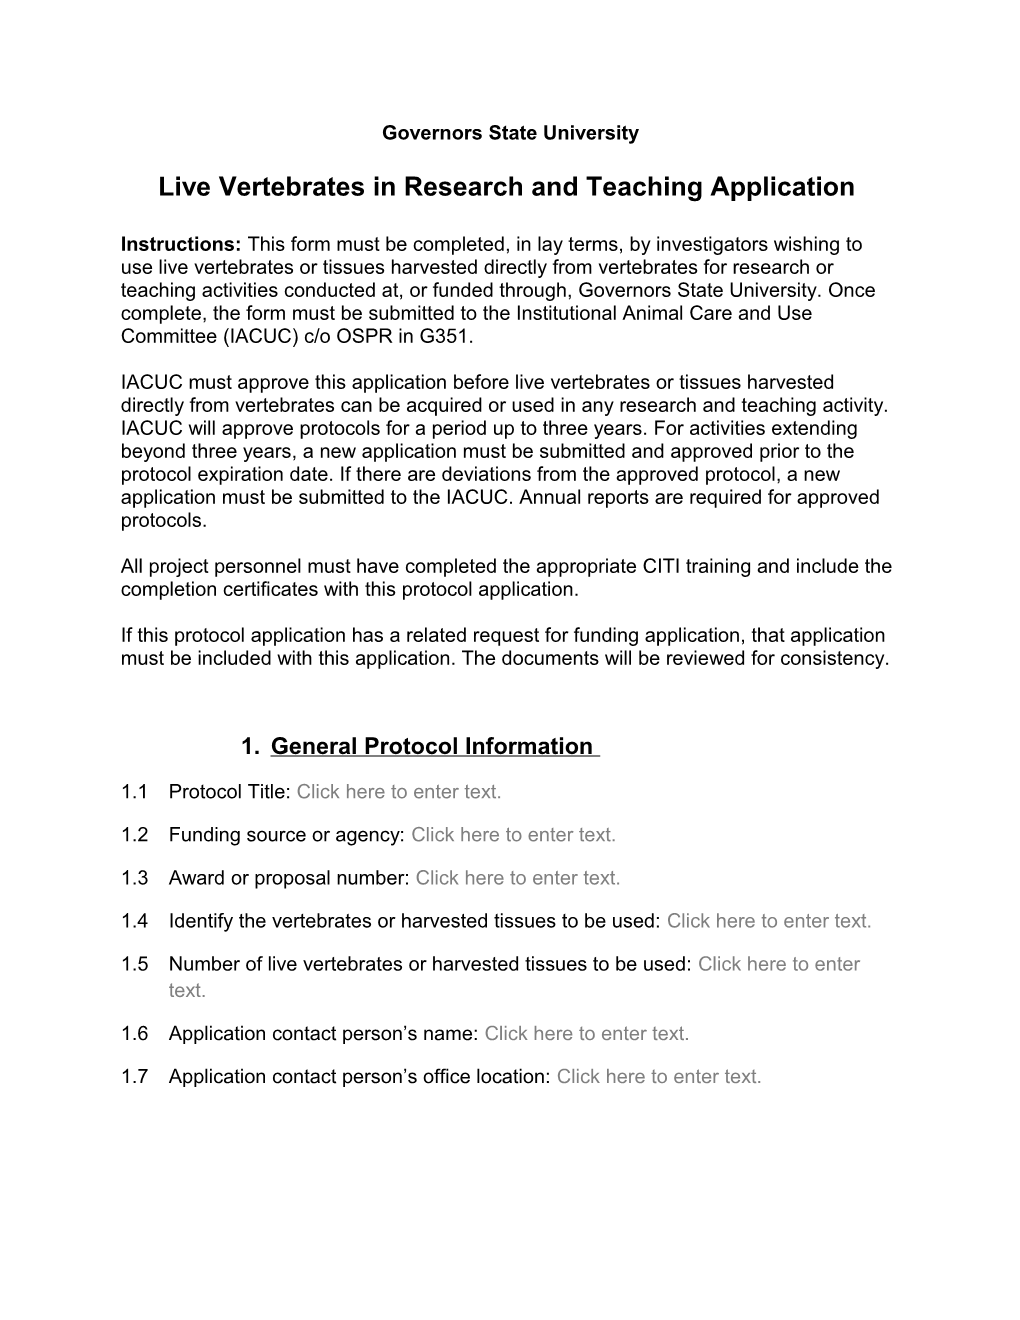 Live Vertebrates in Research and Teaching Application